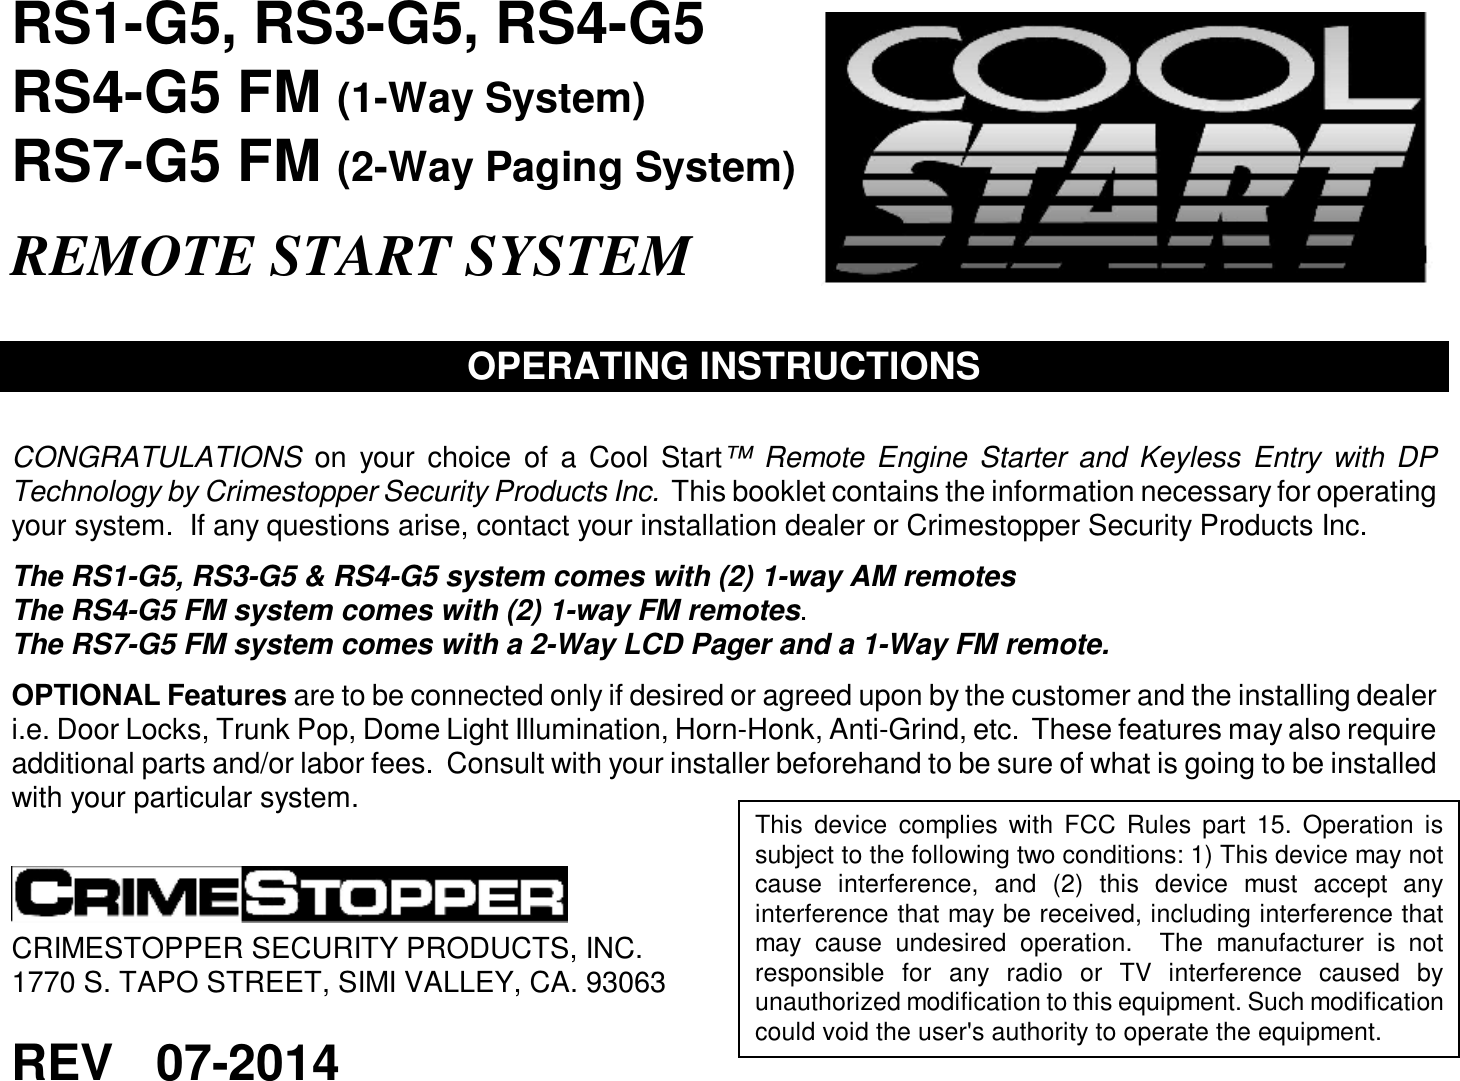  RS1-G5, RS3-G5, RS4-G5 RS4-G5 FM (1-Way System)  RS7-G5 FM (2-Way Paging System)  REMOTE START SYSTEM   OPERATING INSTRUCTIONS   CONGRATULATIONS on your choice of a Cool Start™ Remote Engine Starter and Keyless Entry with DP Technology by Crimestopper Security Products Inc.  This booklet contains the information necessary for operating your system.  If any questions arise, contact your installation dealer or Crimestopper Security Products Inc.  The RS1-G5, RS3-G5 &amp; RS4-G5 system comes with (2) 1-way AM remotes The RS4-G5 FM system comes with (2) 1-way FM remotes. The RS7-G5 FM system comes with a 2-Way LCD Pager and a 1-Way FM remote.  OPTIONAL Features are to be connected only if desired or agreed upon by the customer and the installing dealer i.e. Door Locks, Trunk Pop, Dome Light Illumination, Horn-Honk, Anti-Grind, etc.  These features may also require additional parts and/or labor fees.  Consult with your installer beforehand to be sure of what is going to be installed with your particular system.     CRIMESTOPPER SECURITY PRODUCTS, INC. 1770 S. TAPO STREET, SIMI VALLEY, CA. 93063  REV   07-2014  This device complies with FCC Rules part 15. Operation is subject to the following two conditions: 1) This device may not cause interference, and (2) this device must accept any interference that may be received, including interference that may cause undesired operation.  The manufacturer is not responsible for any radio or TV interference caused by unauthorized modification to this equipment. Such modification could void the user&apos;s authority to operate the equipment.   